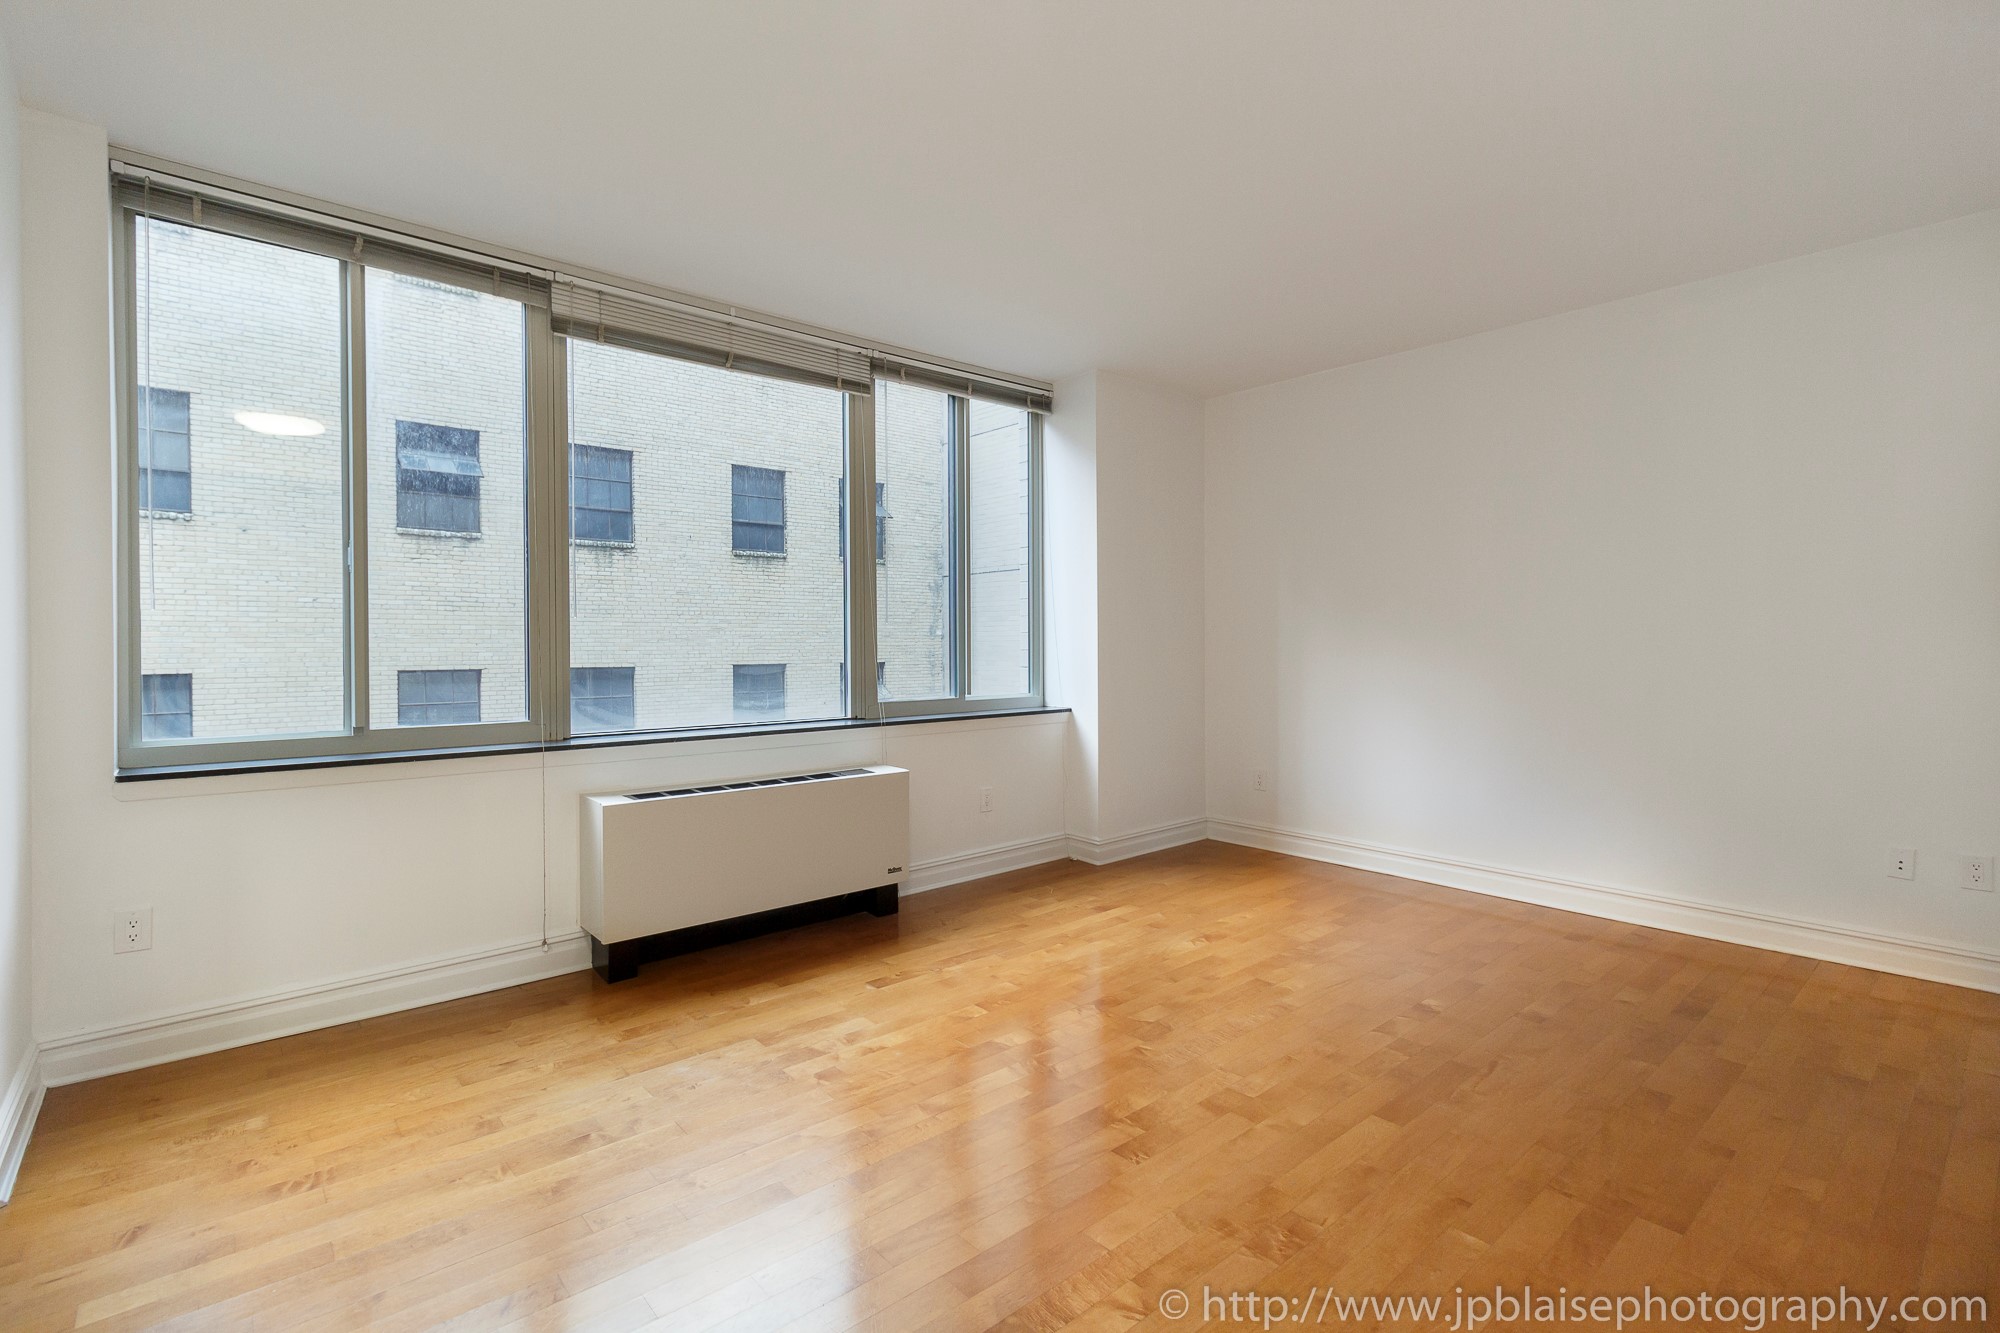 NY airbnb real estate interior apartment photographer upper east side manhattan ny new york Living room